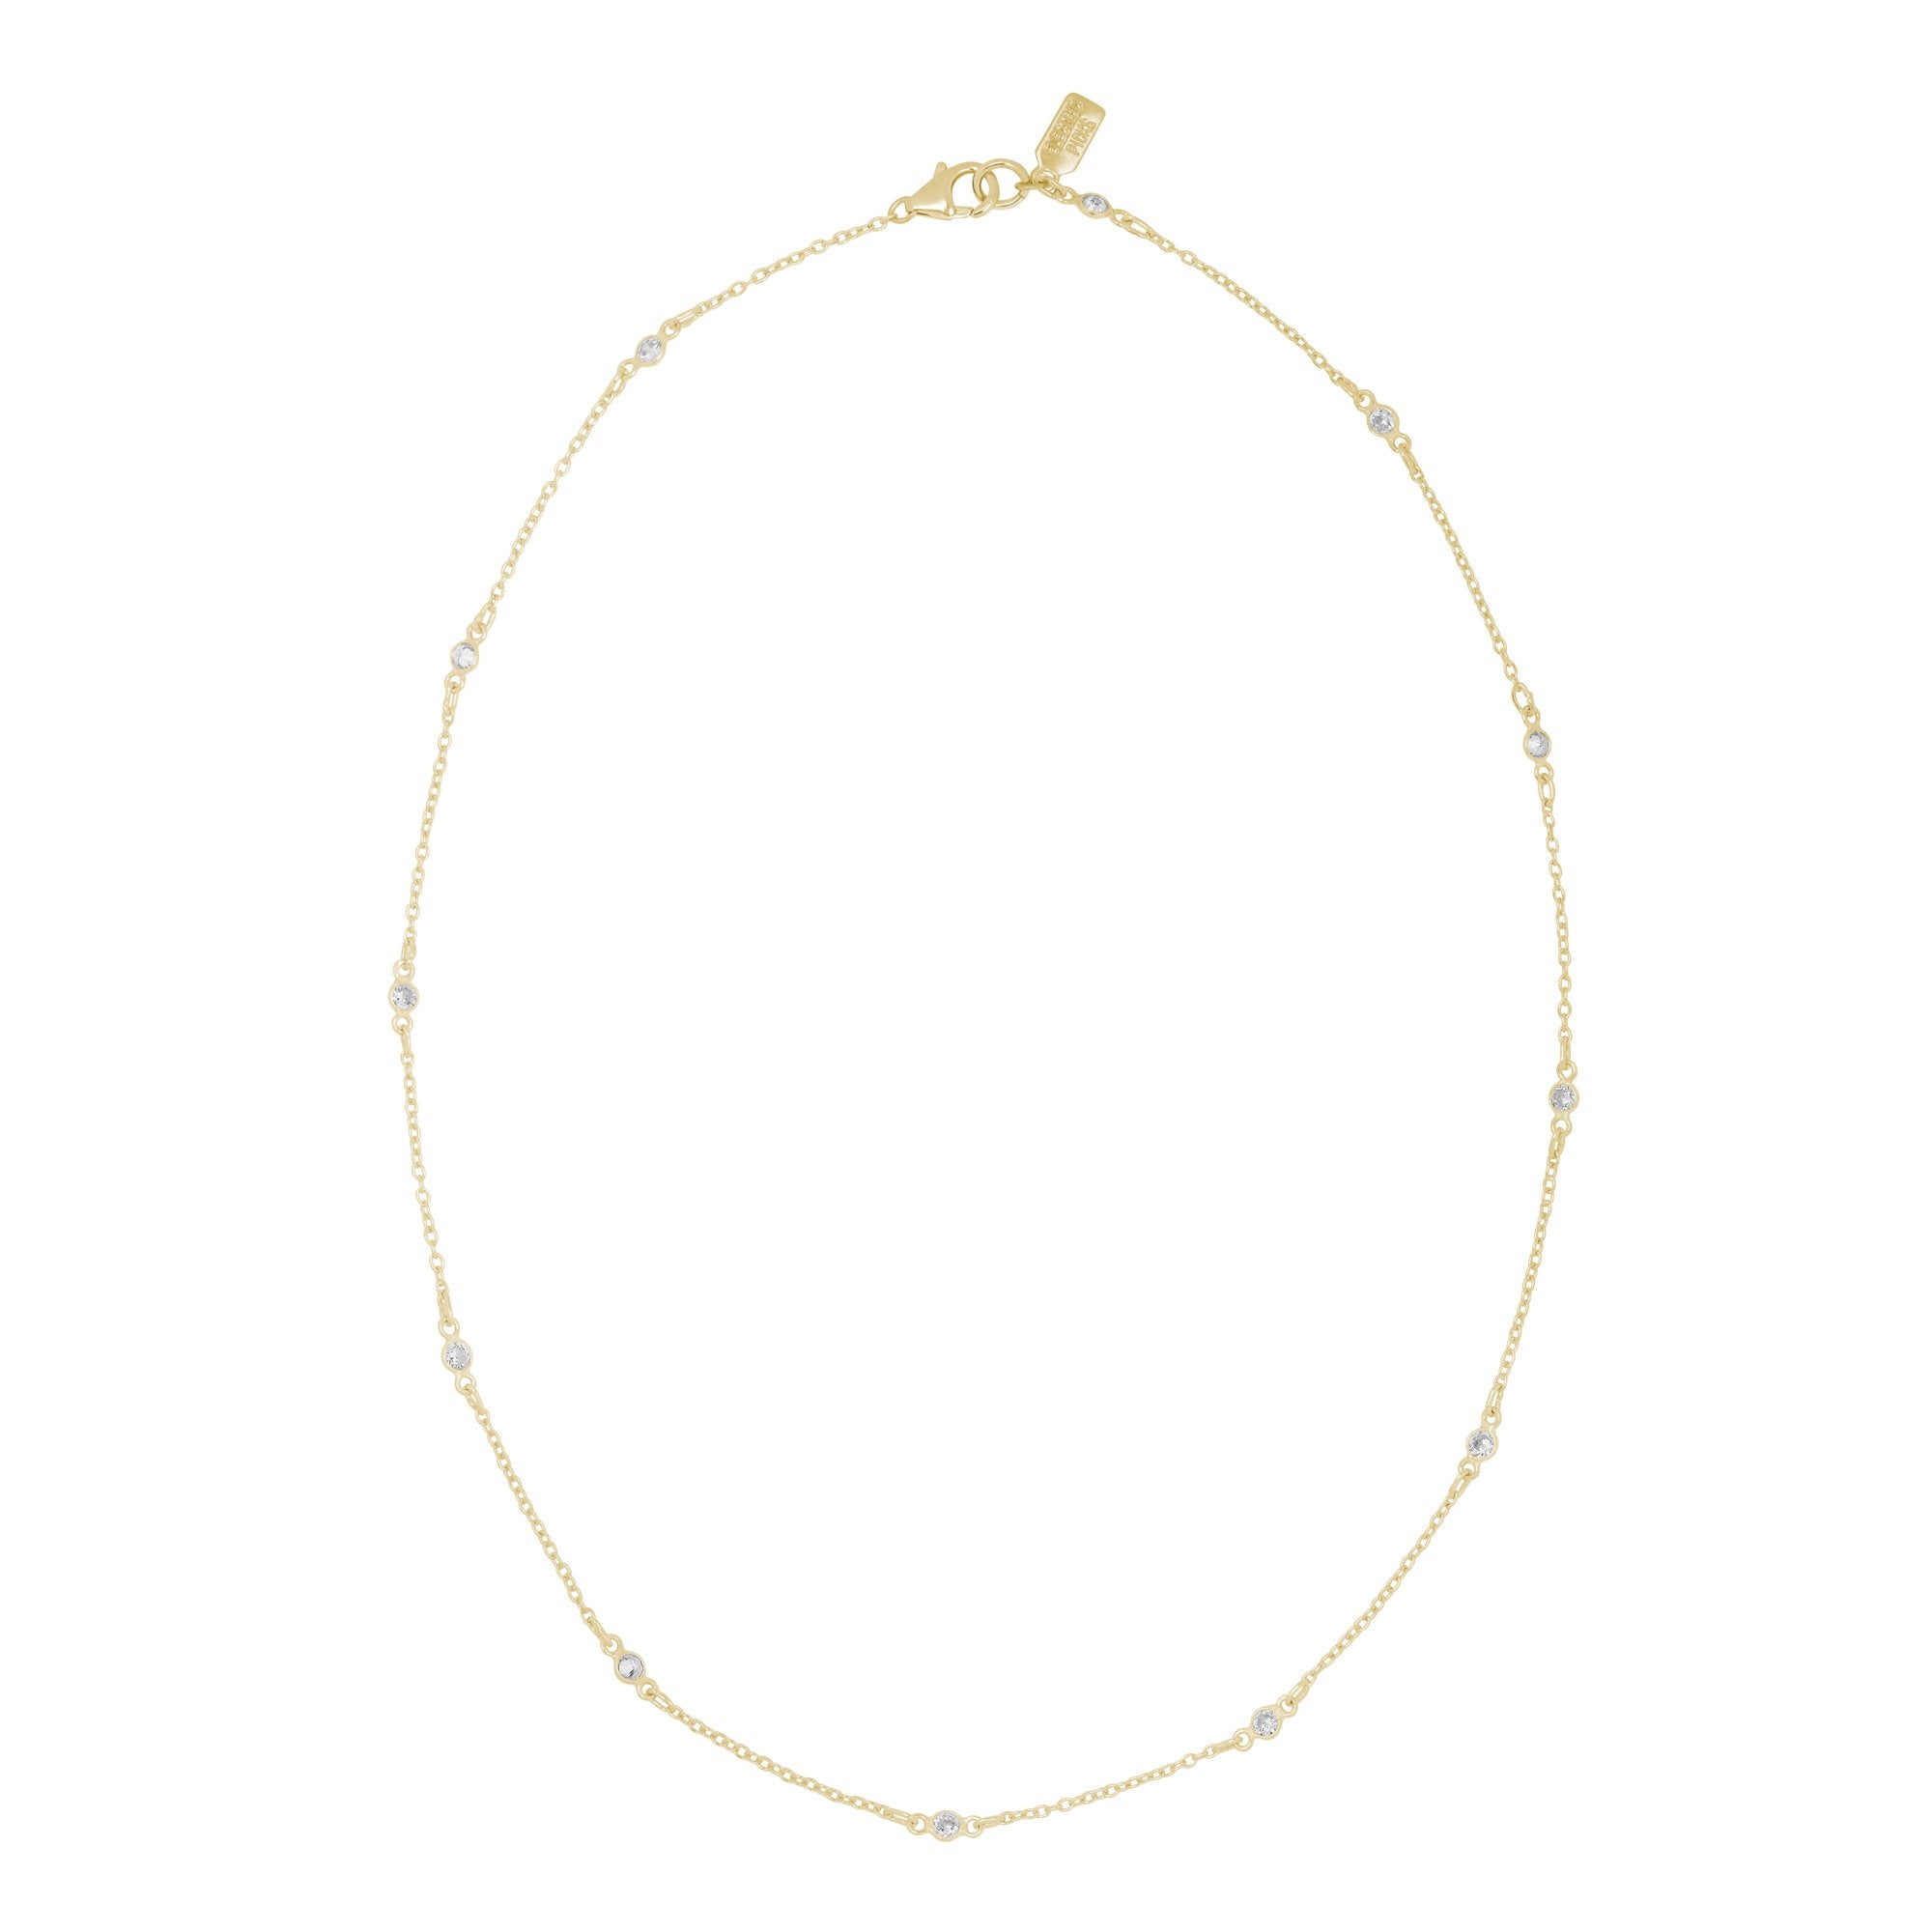 The Large Gleam Necklace in Gold